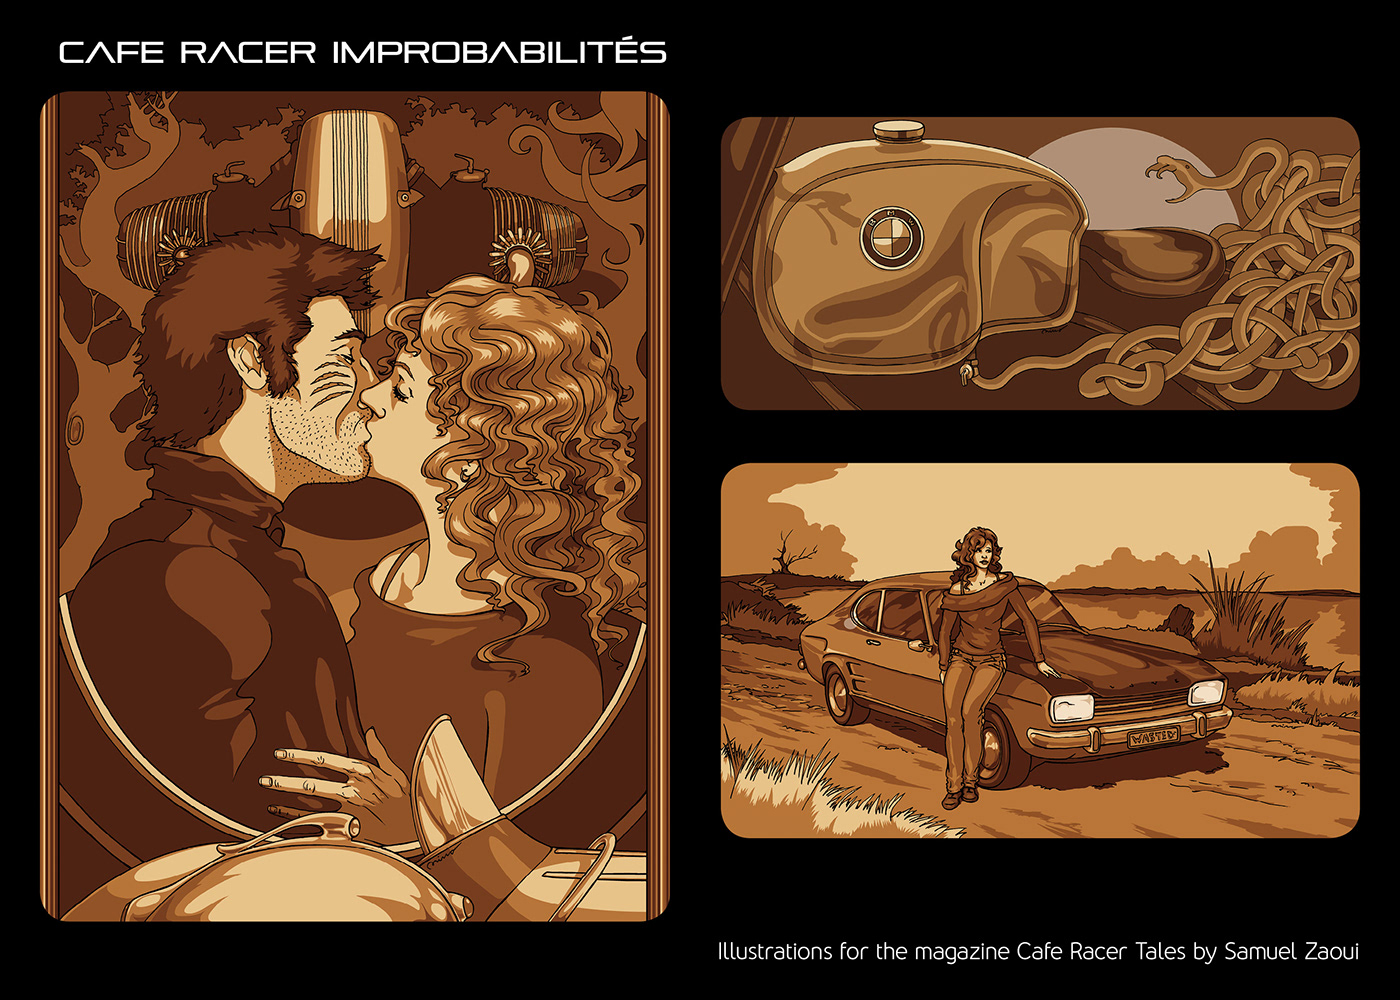 illustrations for the magazine Cafe racer